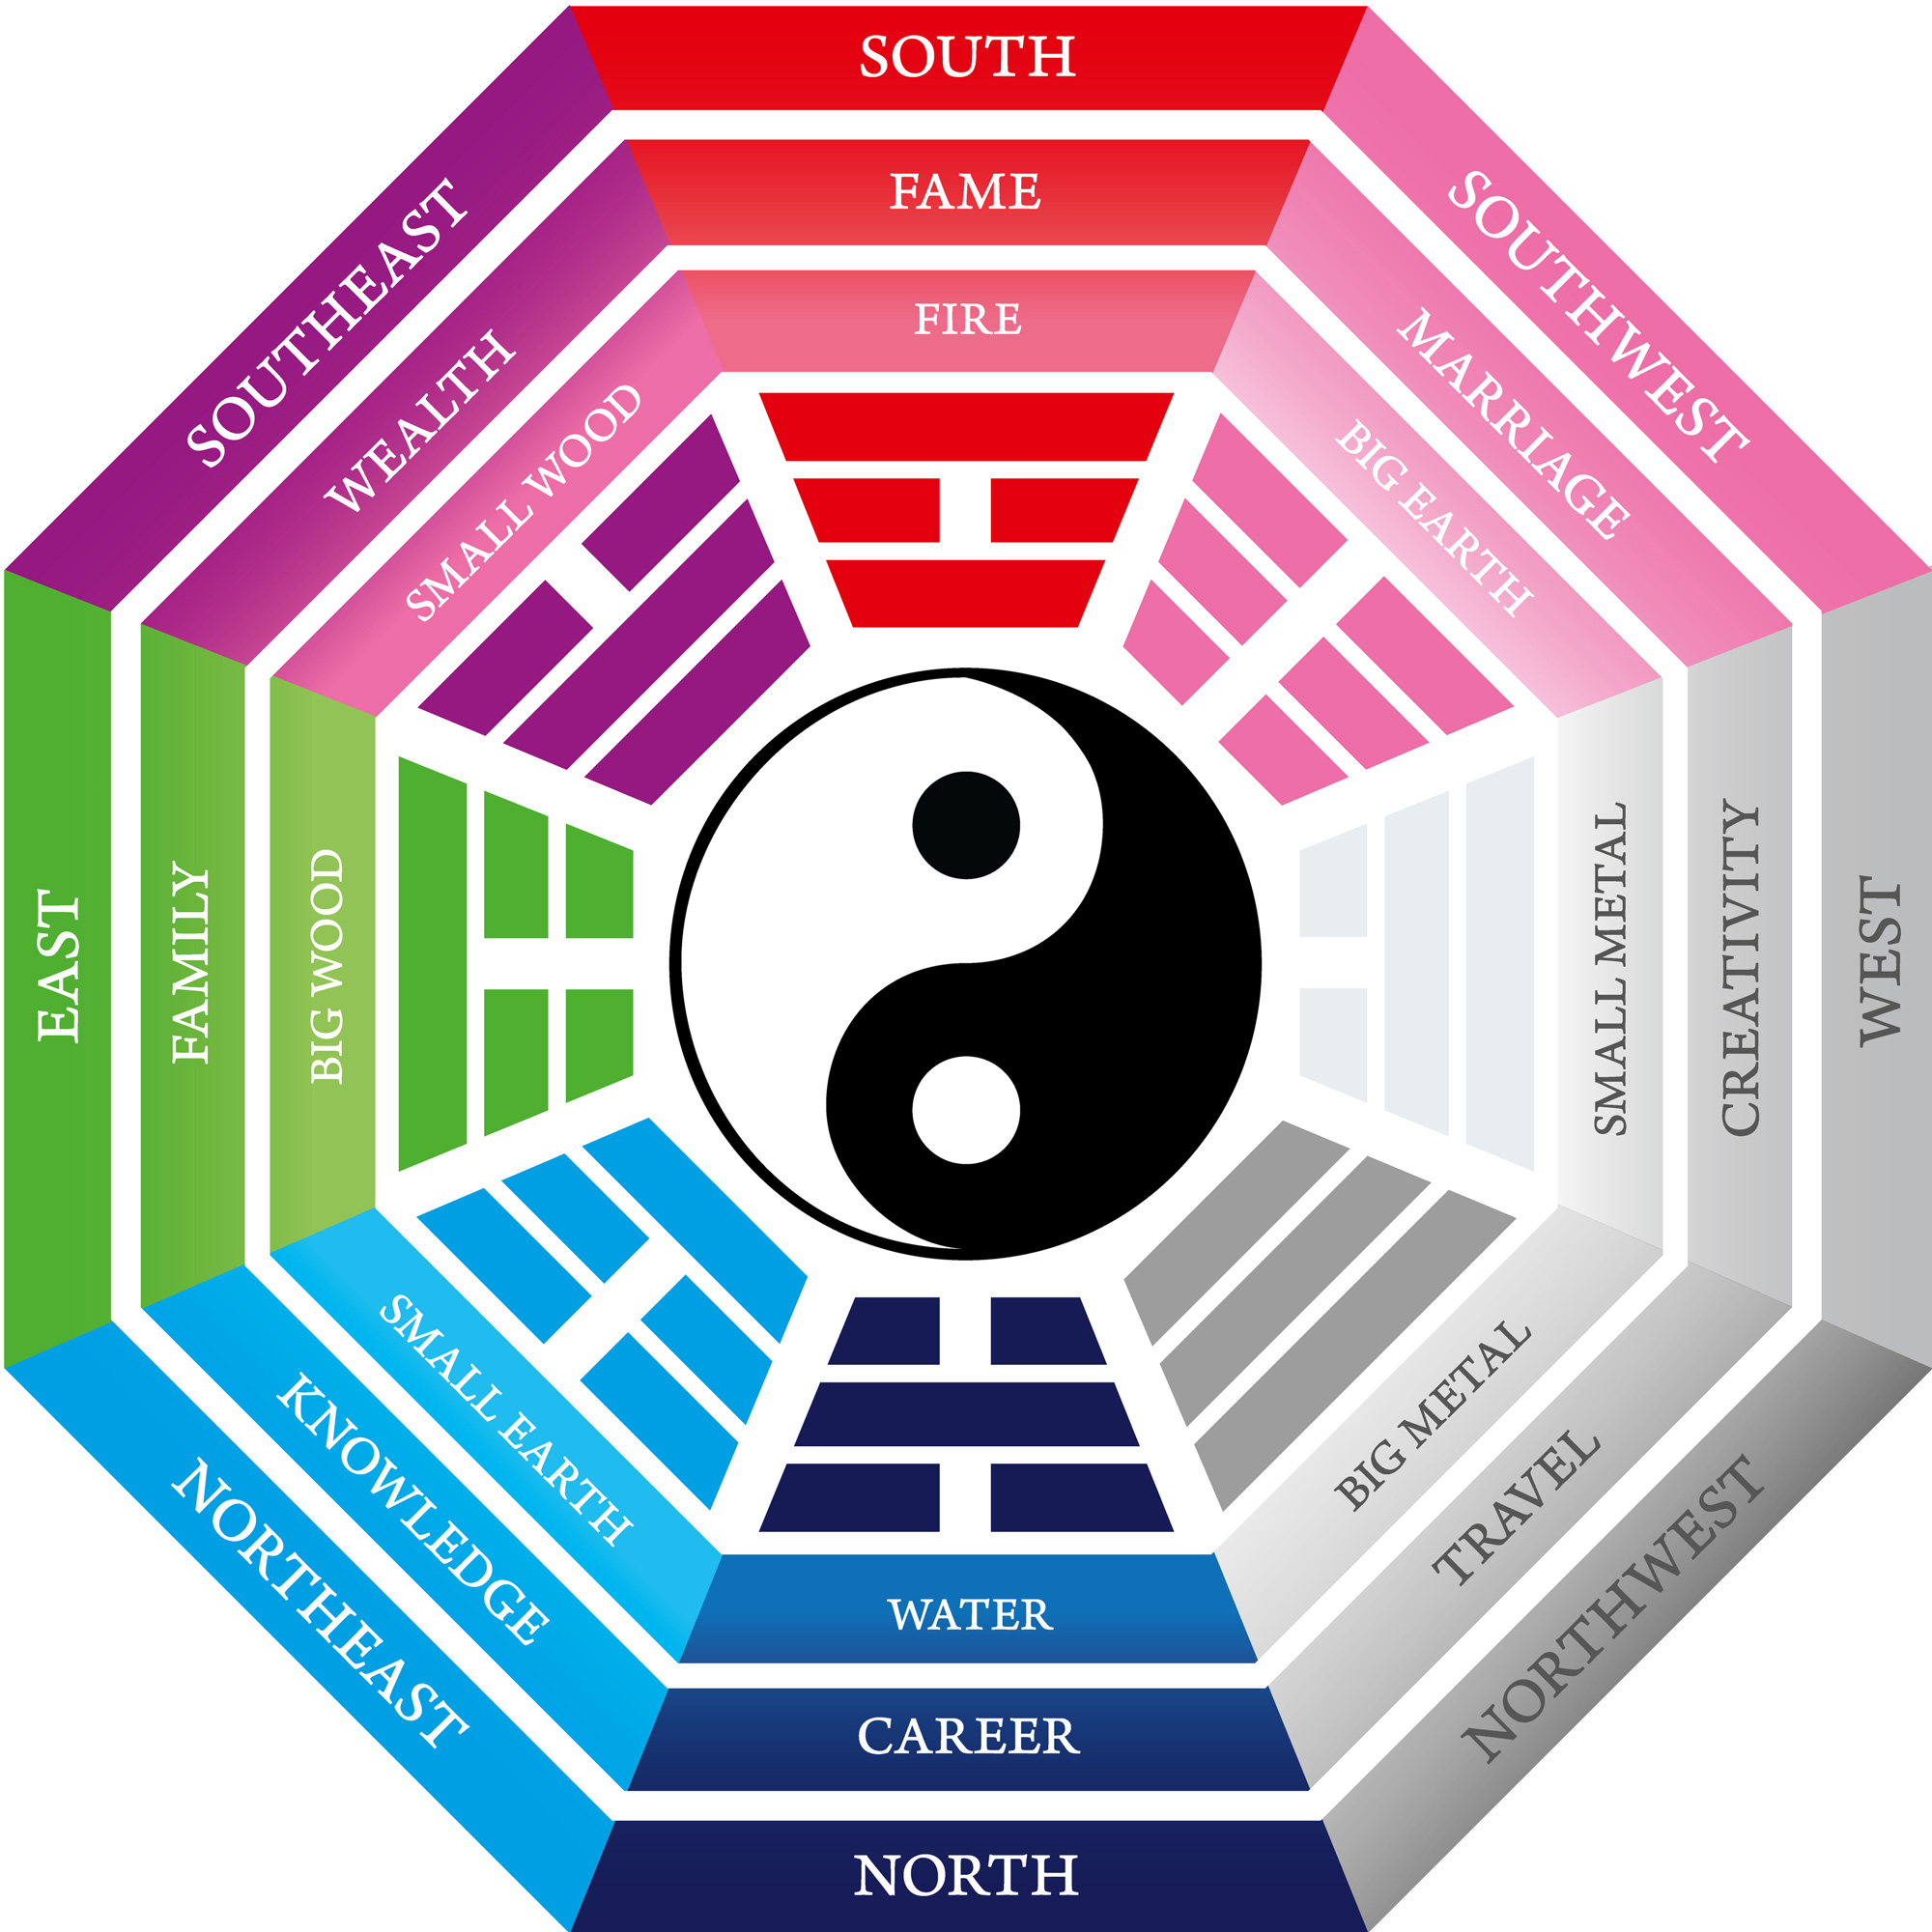 How to Attract Love with Feng Shui   Whats Your Sign.com